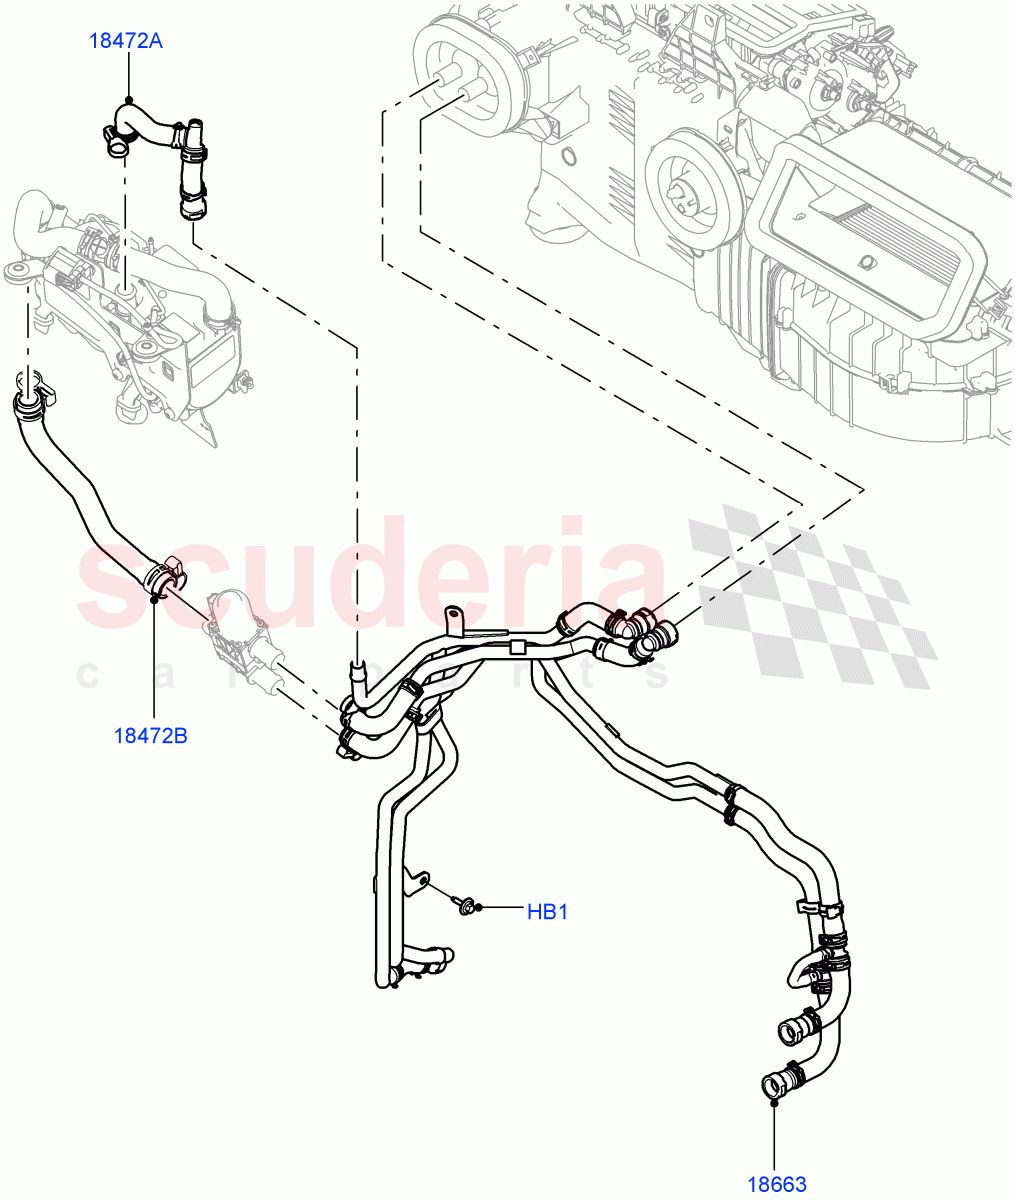 Heater Hoses(Front)(2.0L I4 DSL HIGH DOHC AJ200,With Fuel Fired Heater,With Air Conditioning - Front/Rear,Park Heating With Remote Control)((V)FROMHA000001,(V)TOHA999999) of Land Rover Land Rover Range Rover Sport (2014+) [3.0 I6 Turbo Petrol AJ20P6]